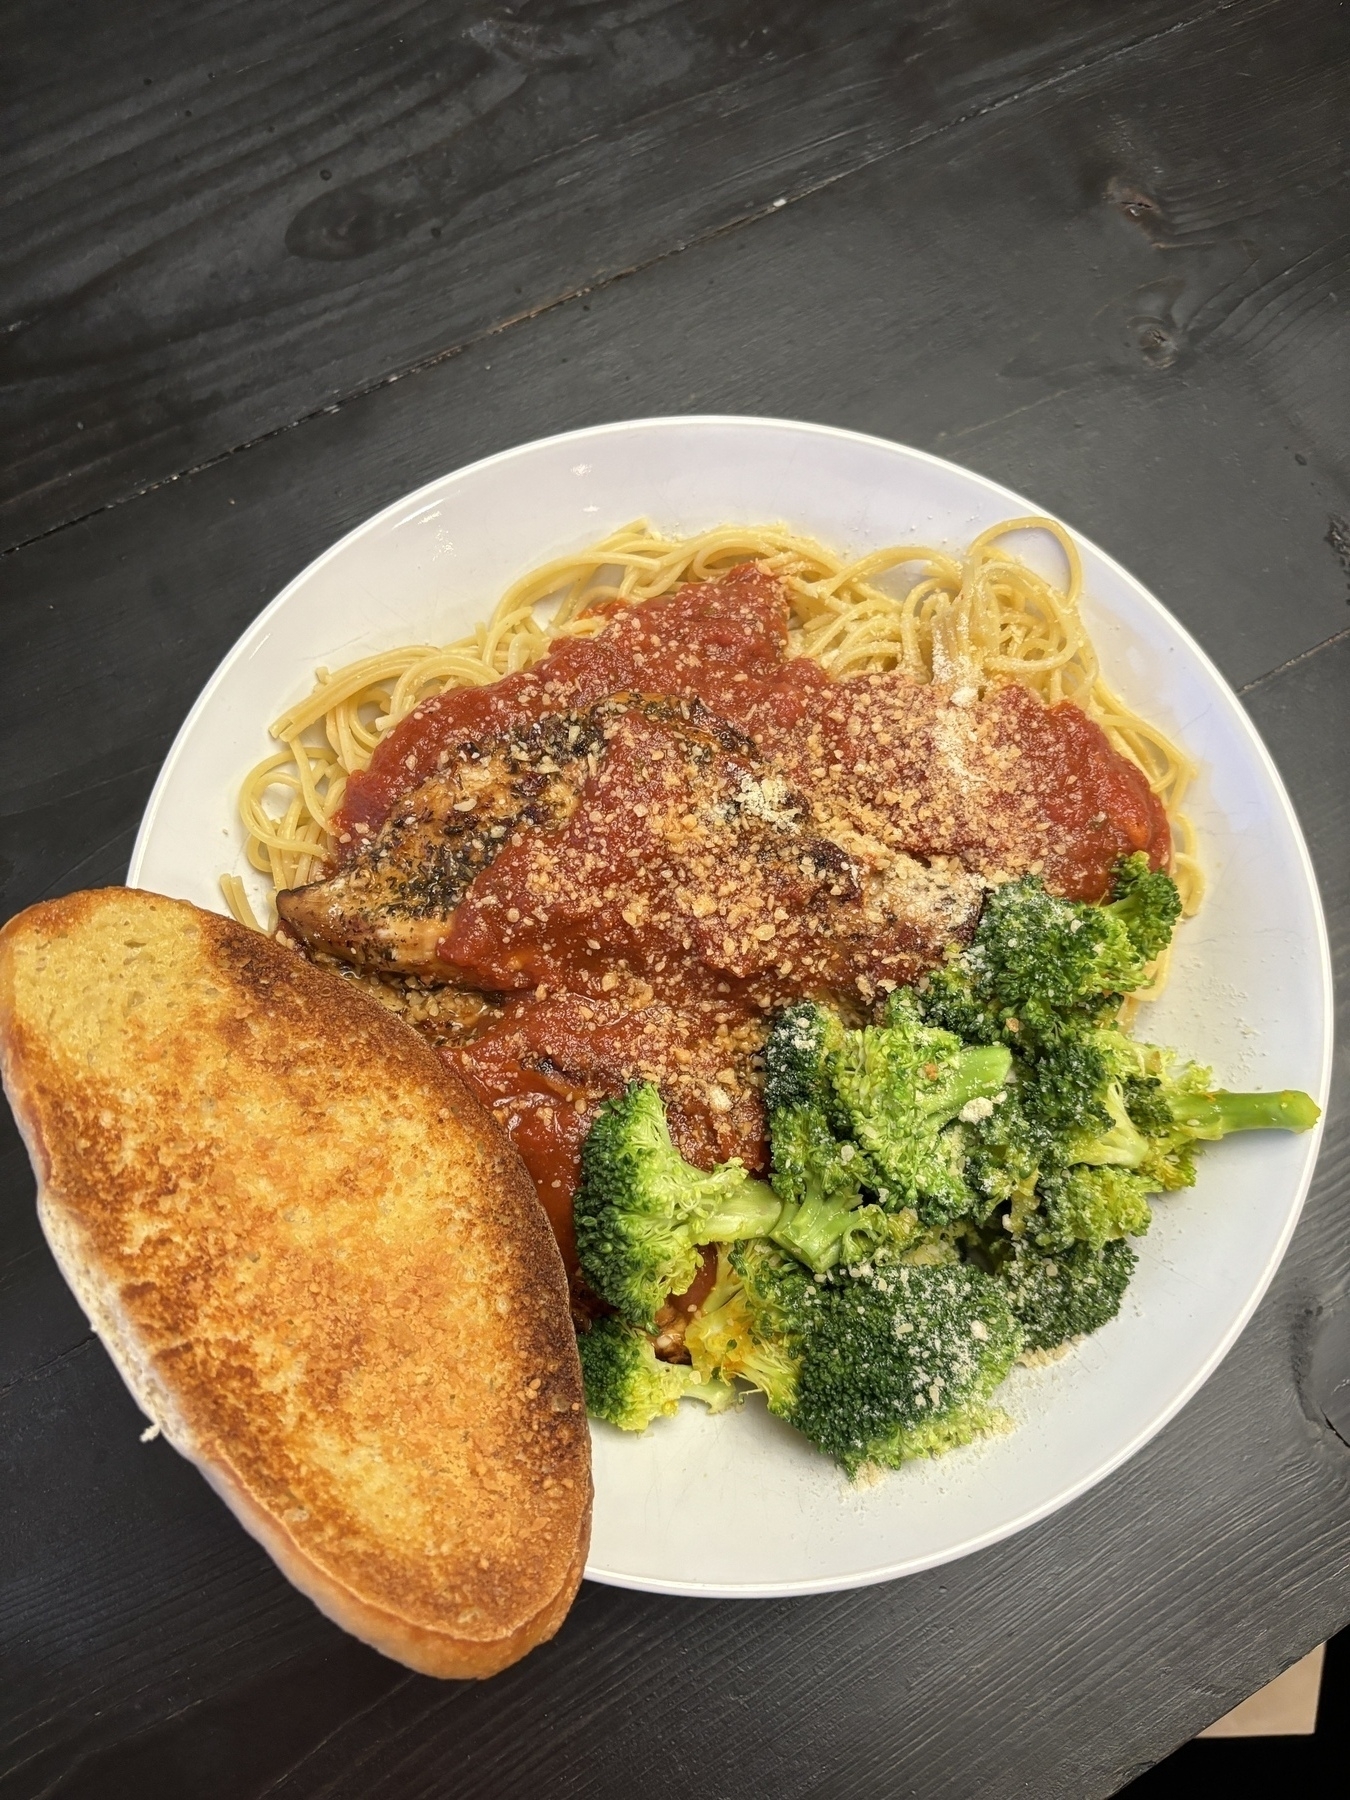 Garlic toast, steamed broccoli, pan friend chicken seasoned with Italian seasoning and balsamic vinegar, on a bed of protein pasta with tomato basil sauce. 